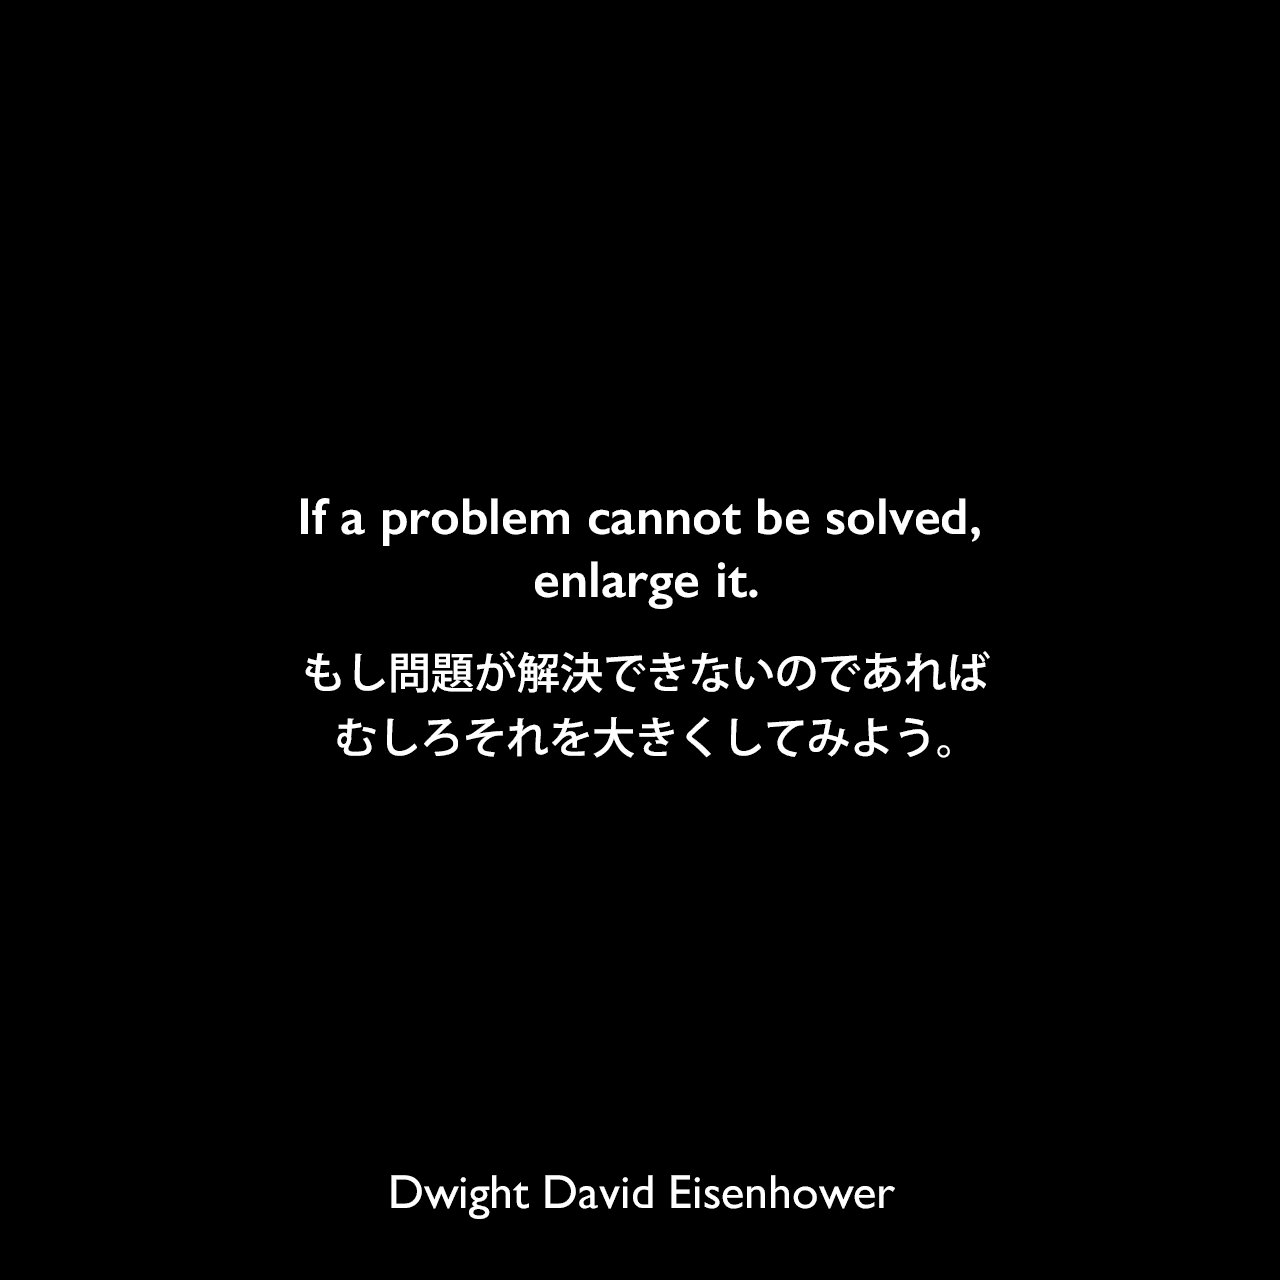 If a problem cannot be solved, enlarge it.もし問題が解決できないのであれば、むしろそれを大きくしてみよう。Dwight David Eisenhower